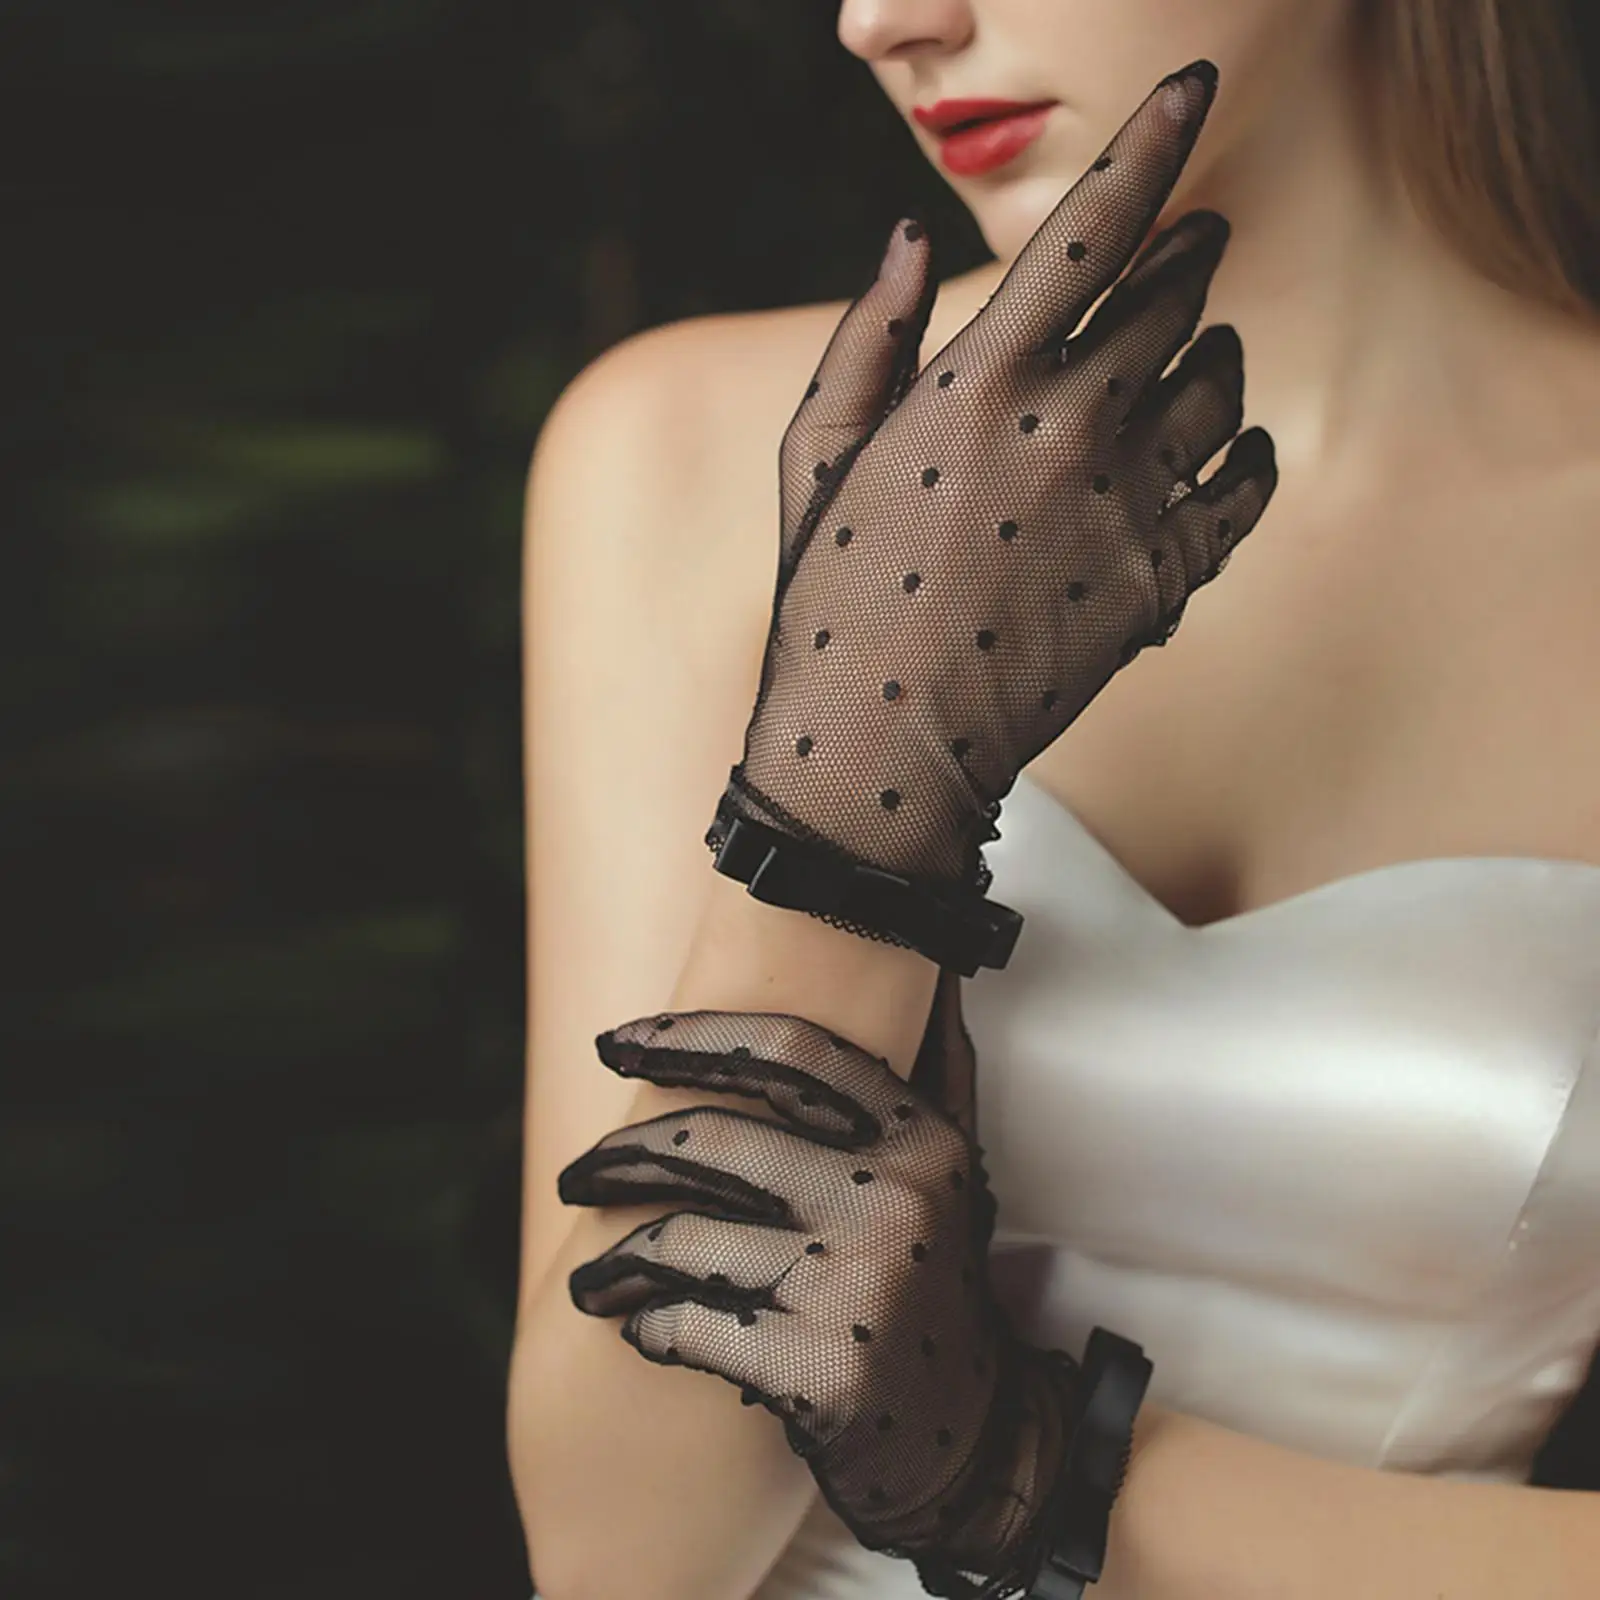 Women Bride Gloves Girls Formal Wrist Length Prom Costume Accessories Lace Gloves for Wedding